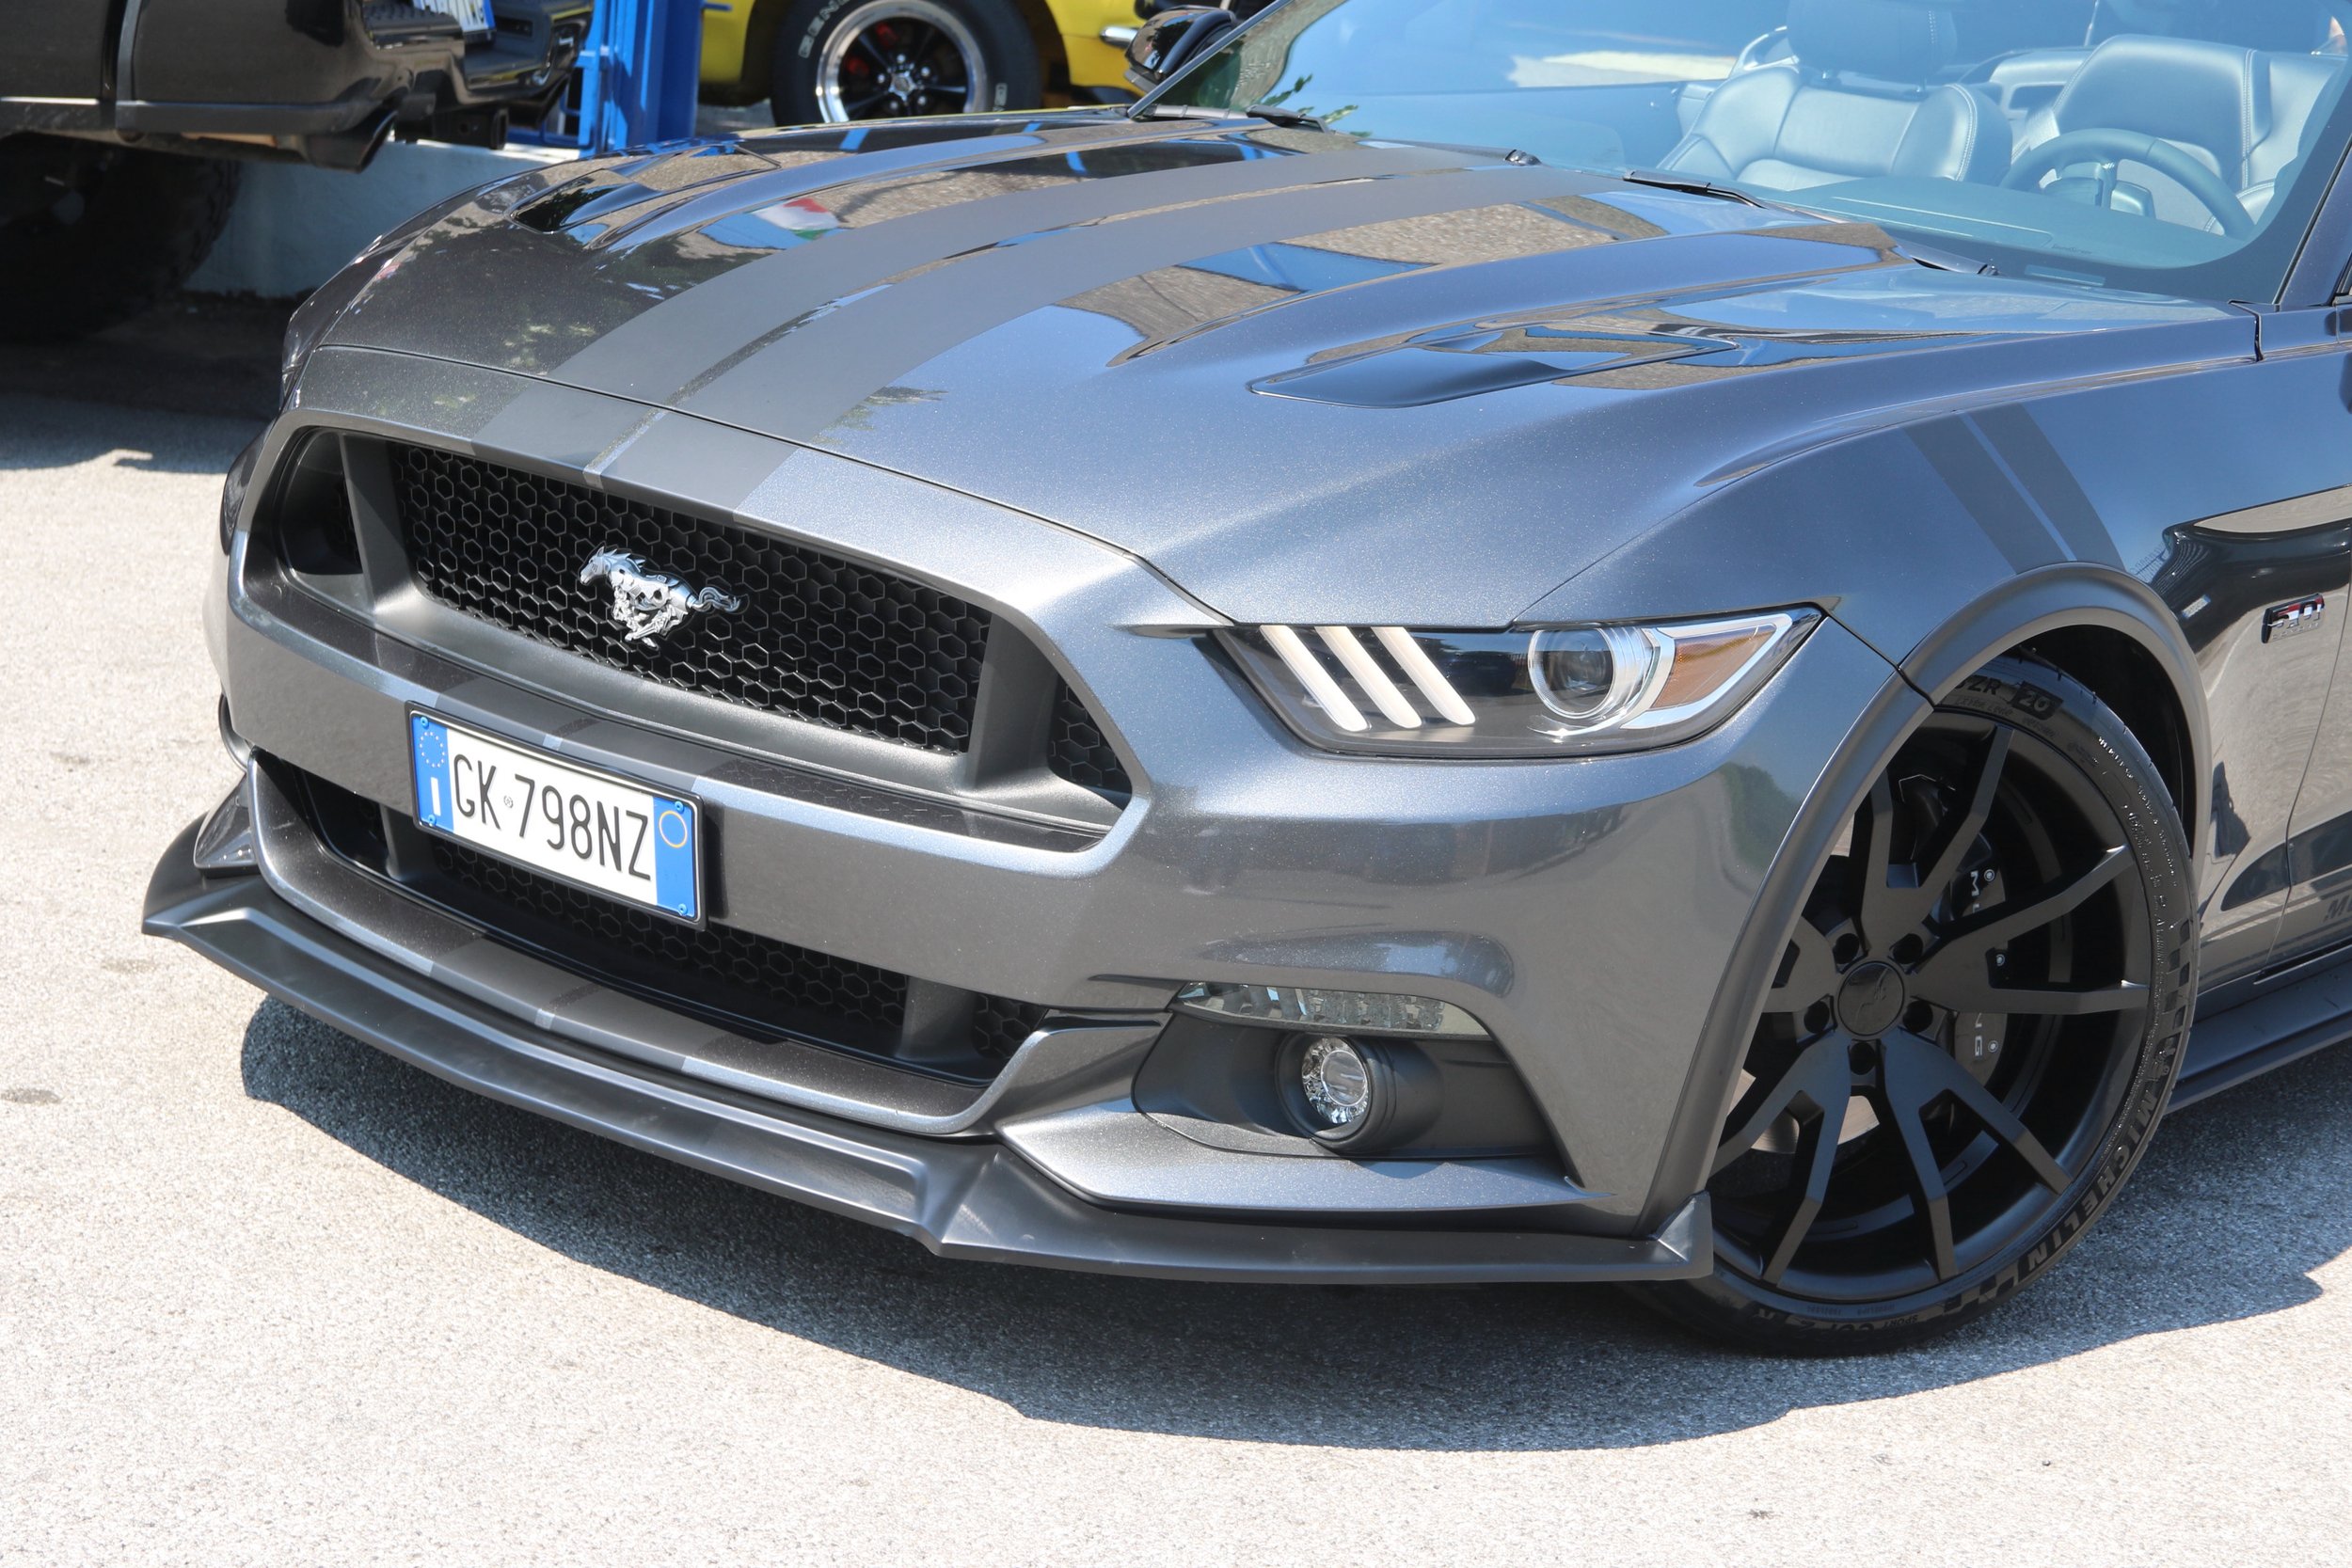 07 2015 Mustang GT 5.0L Coyote Convertible Marco Vignale.jpeg